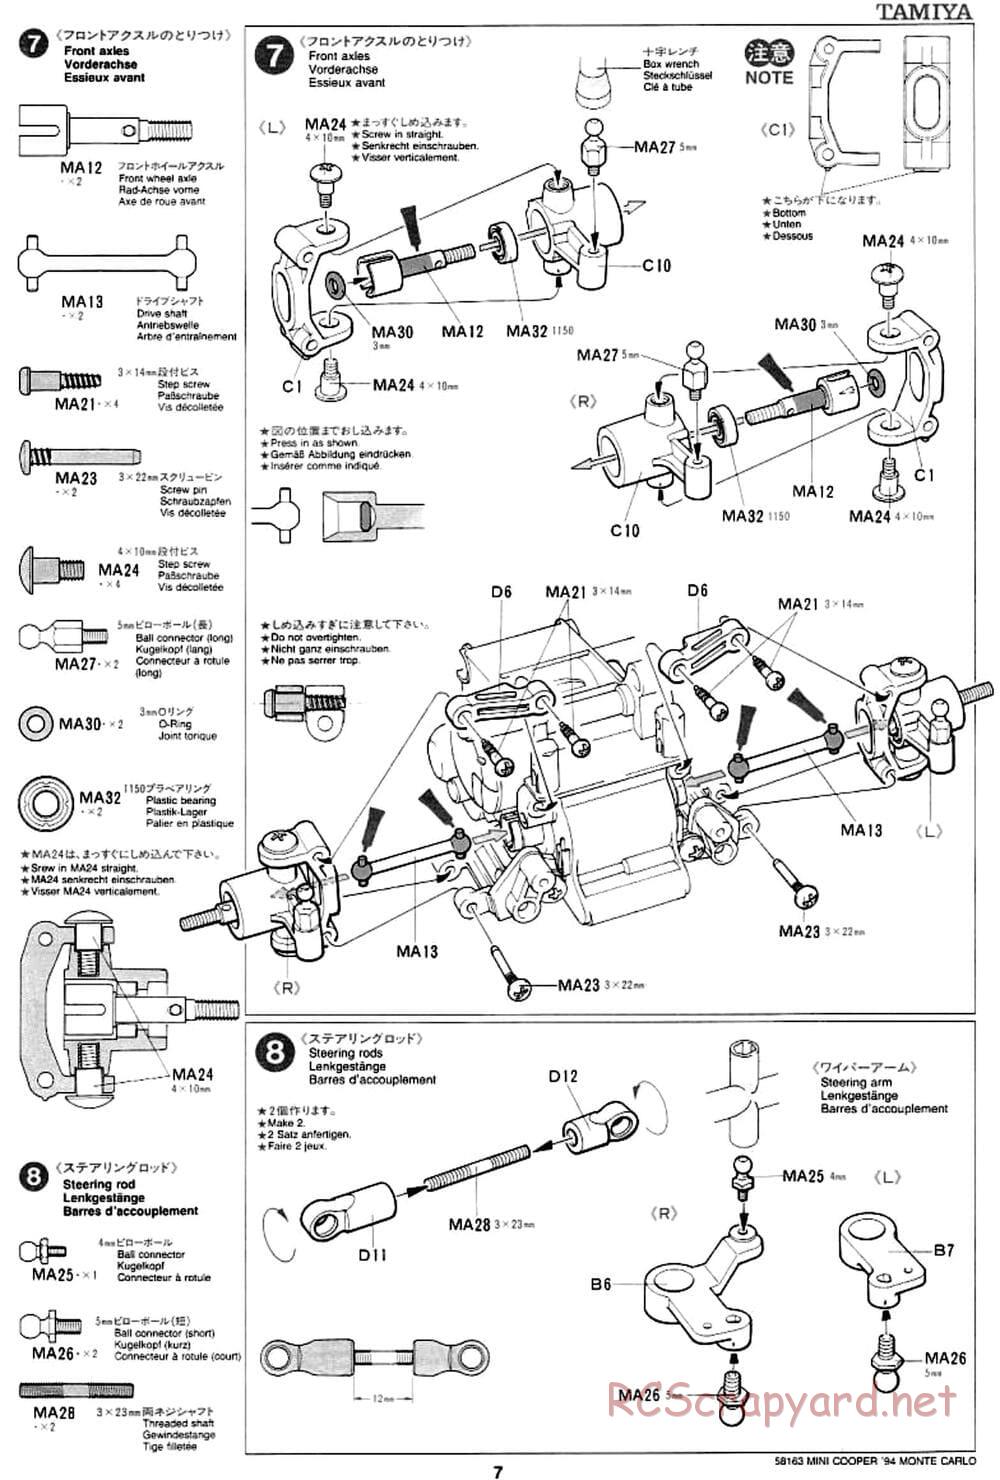 Tamiya - Rover Mini Cooper 94 Monte-Carlo - M01 Chassis - Manual - Page 7